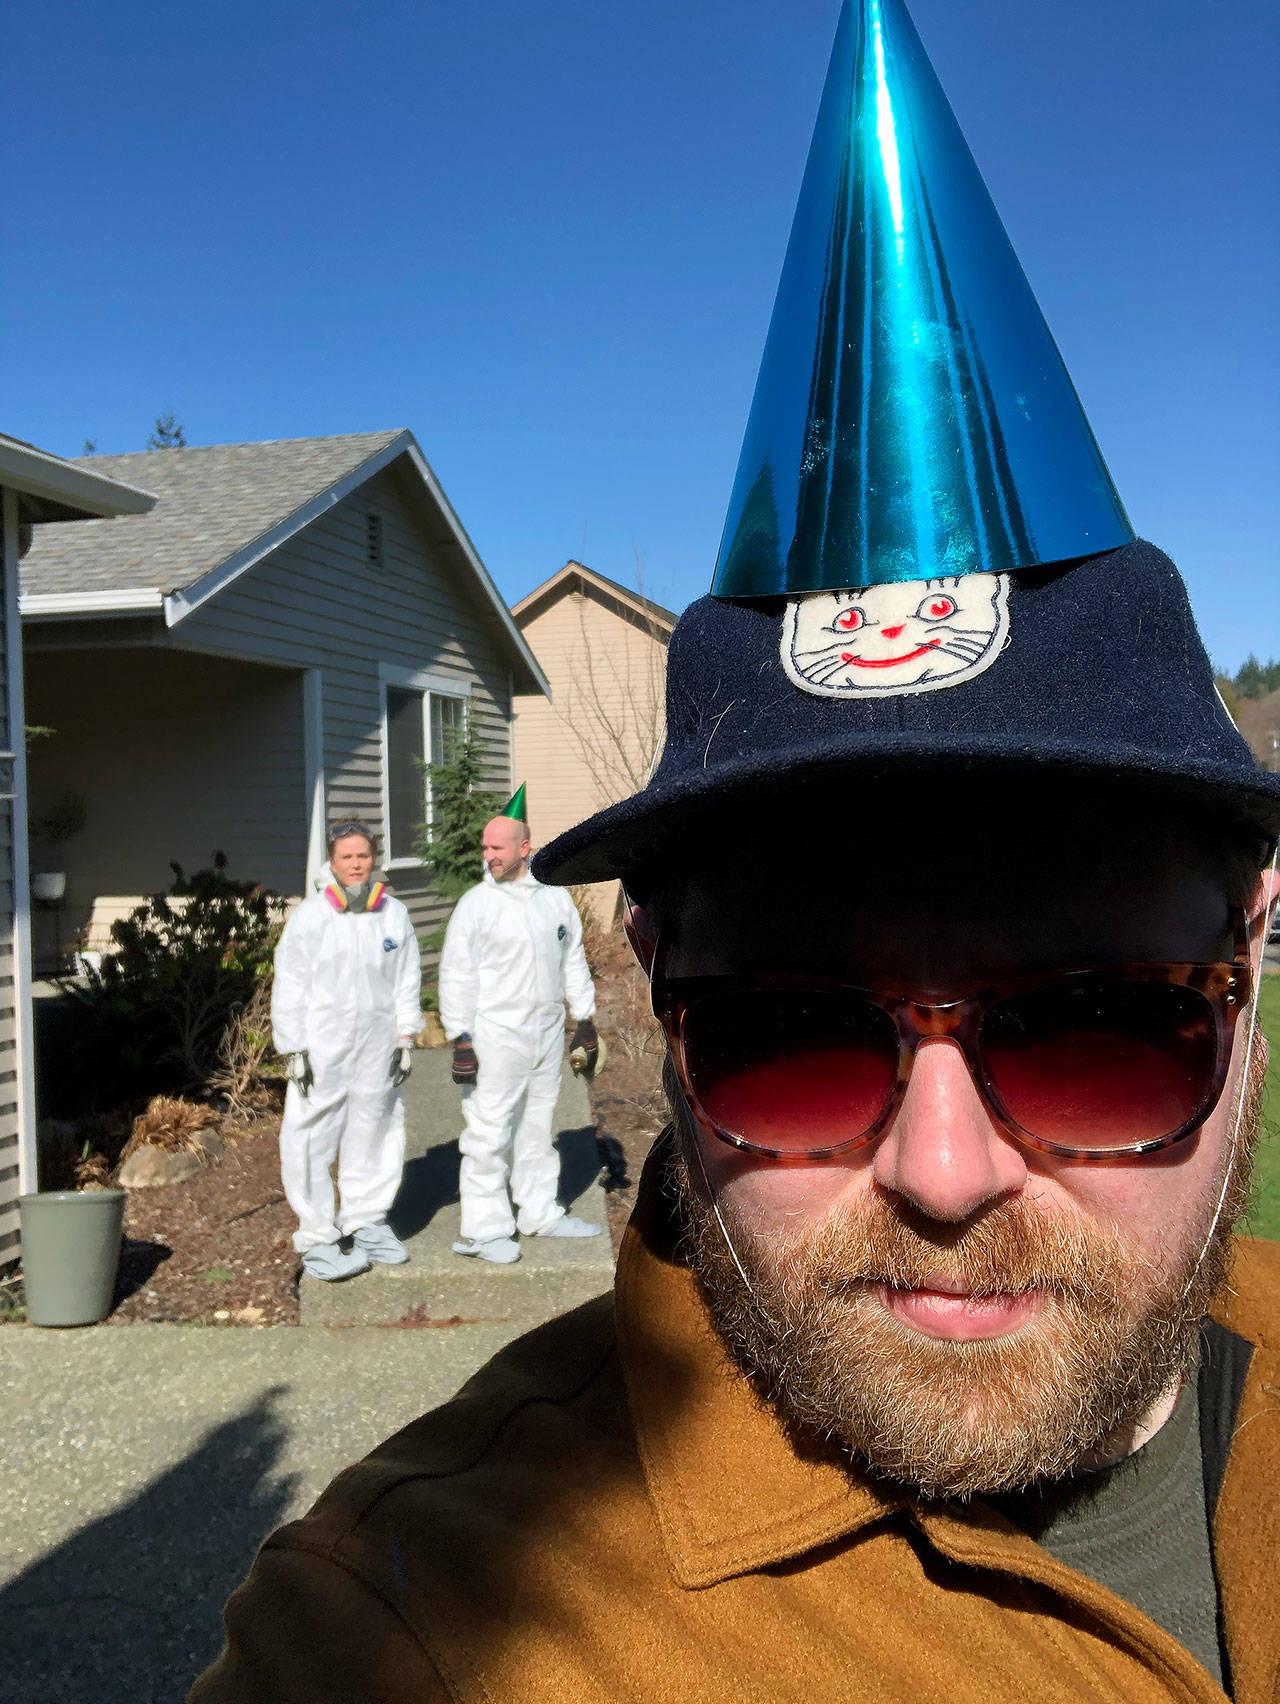 Tyler Chism on his 33rd birthday in a party hat his in-laws left him along with a cake at the end of the driveway. (Tyler Chism)